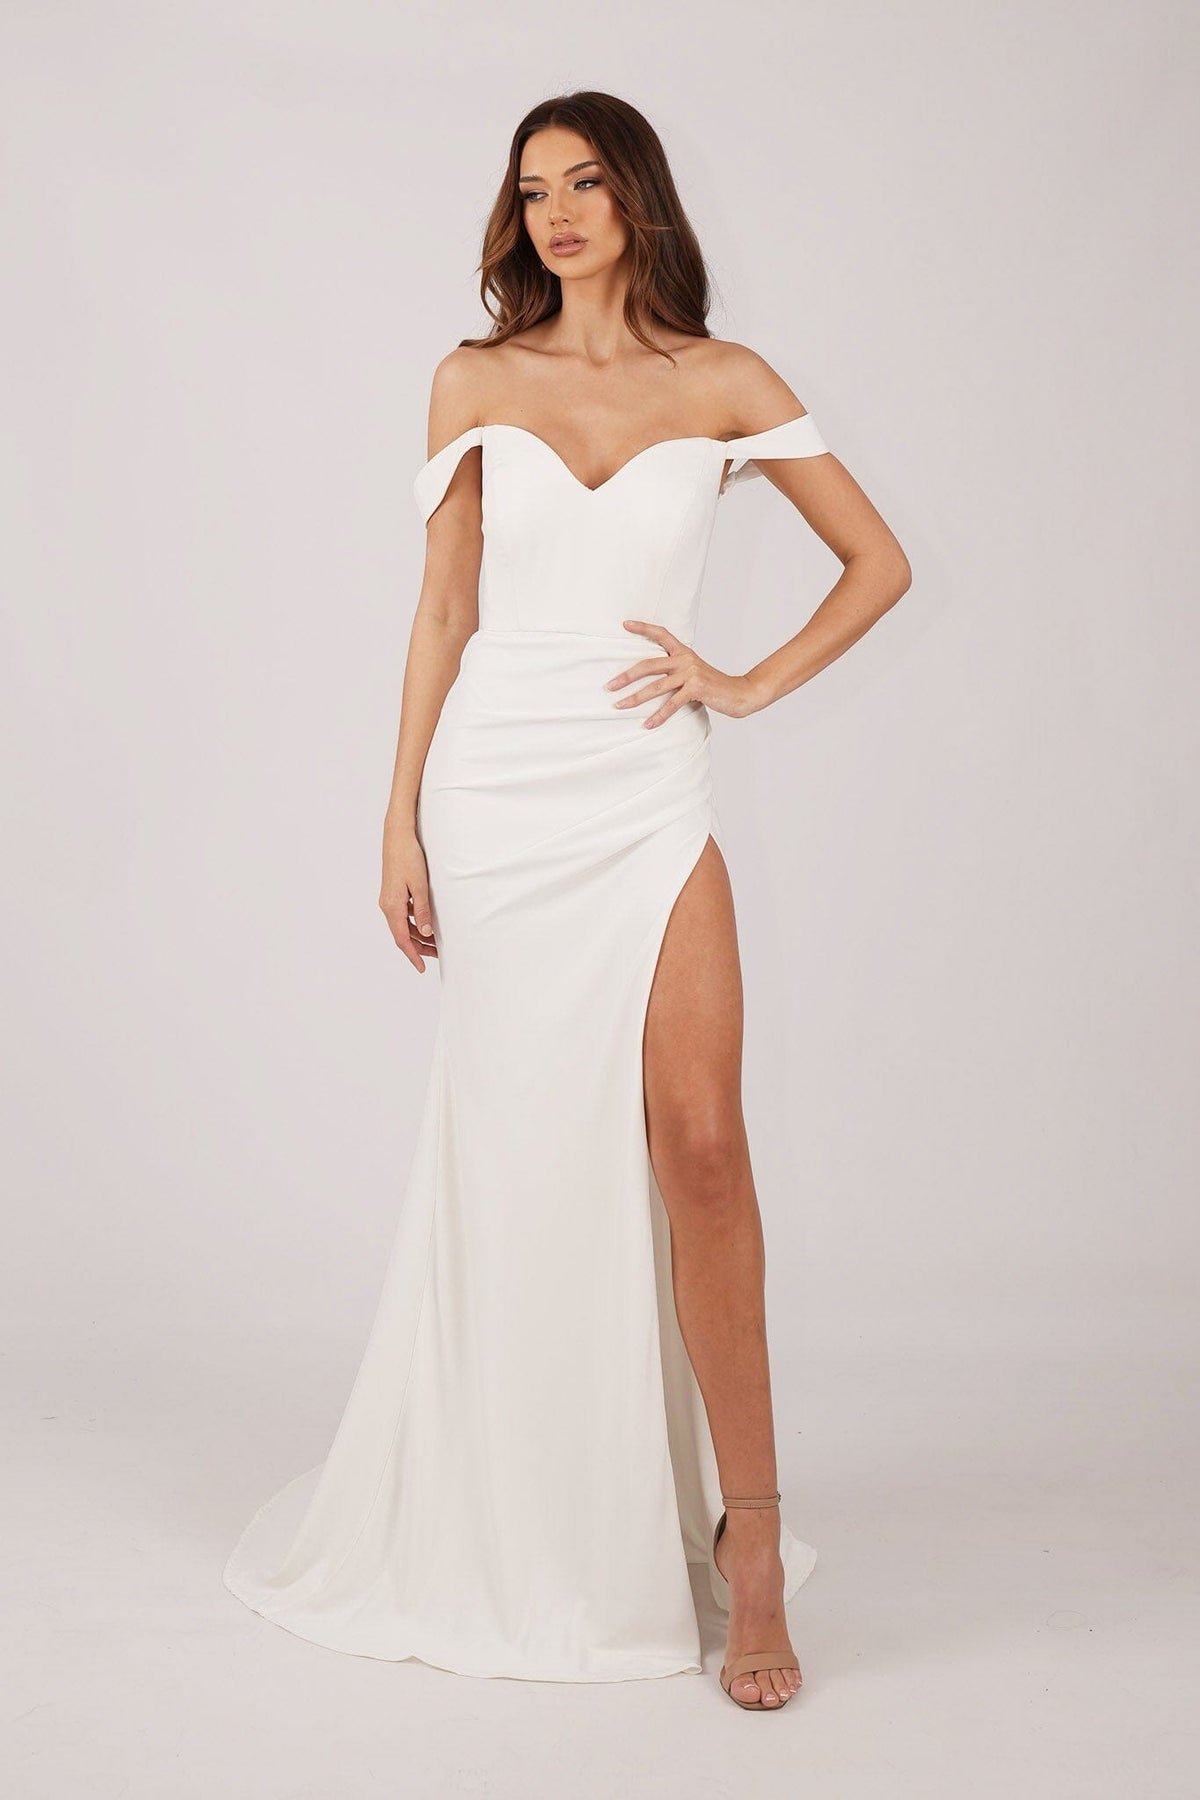 Ivory White Floor Length Evening Gown with Sweetheart Neckline, Off-Shoulder Straps, Draped Detail and Thigh High Side Slit